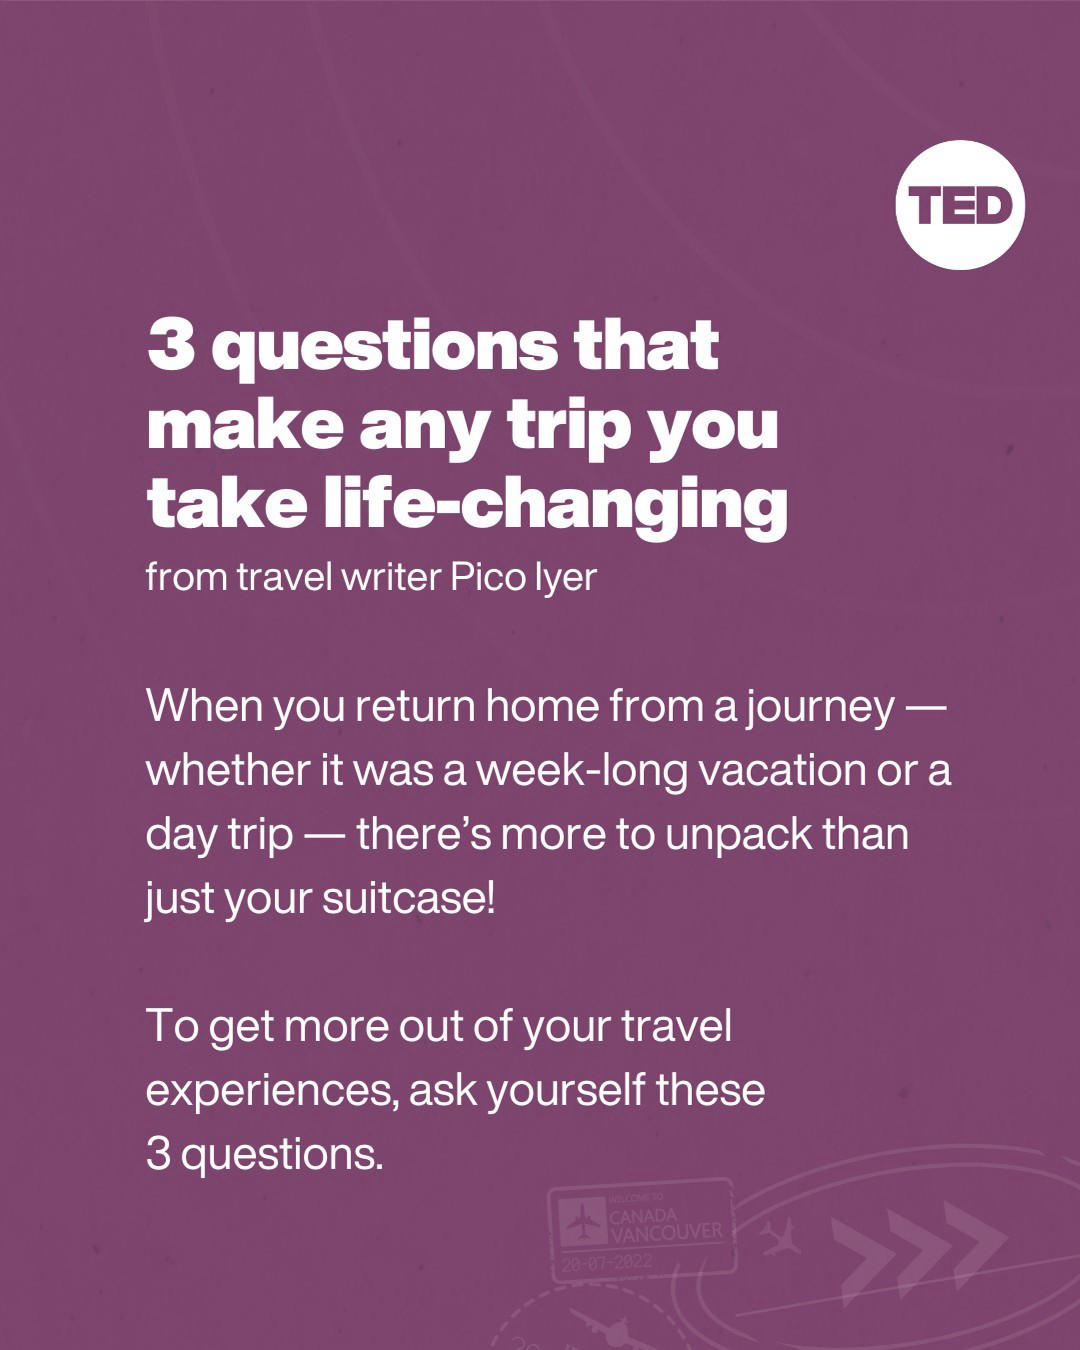 TED Talks - You’ve just returned from a trip — ready to start exploring again